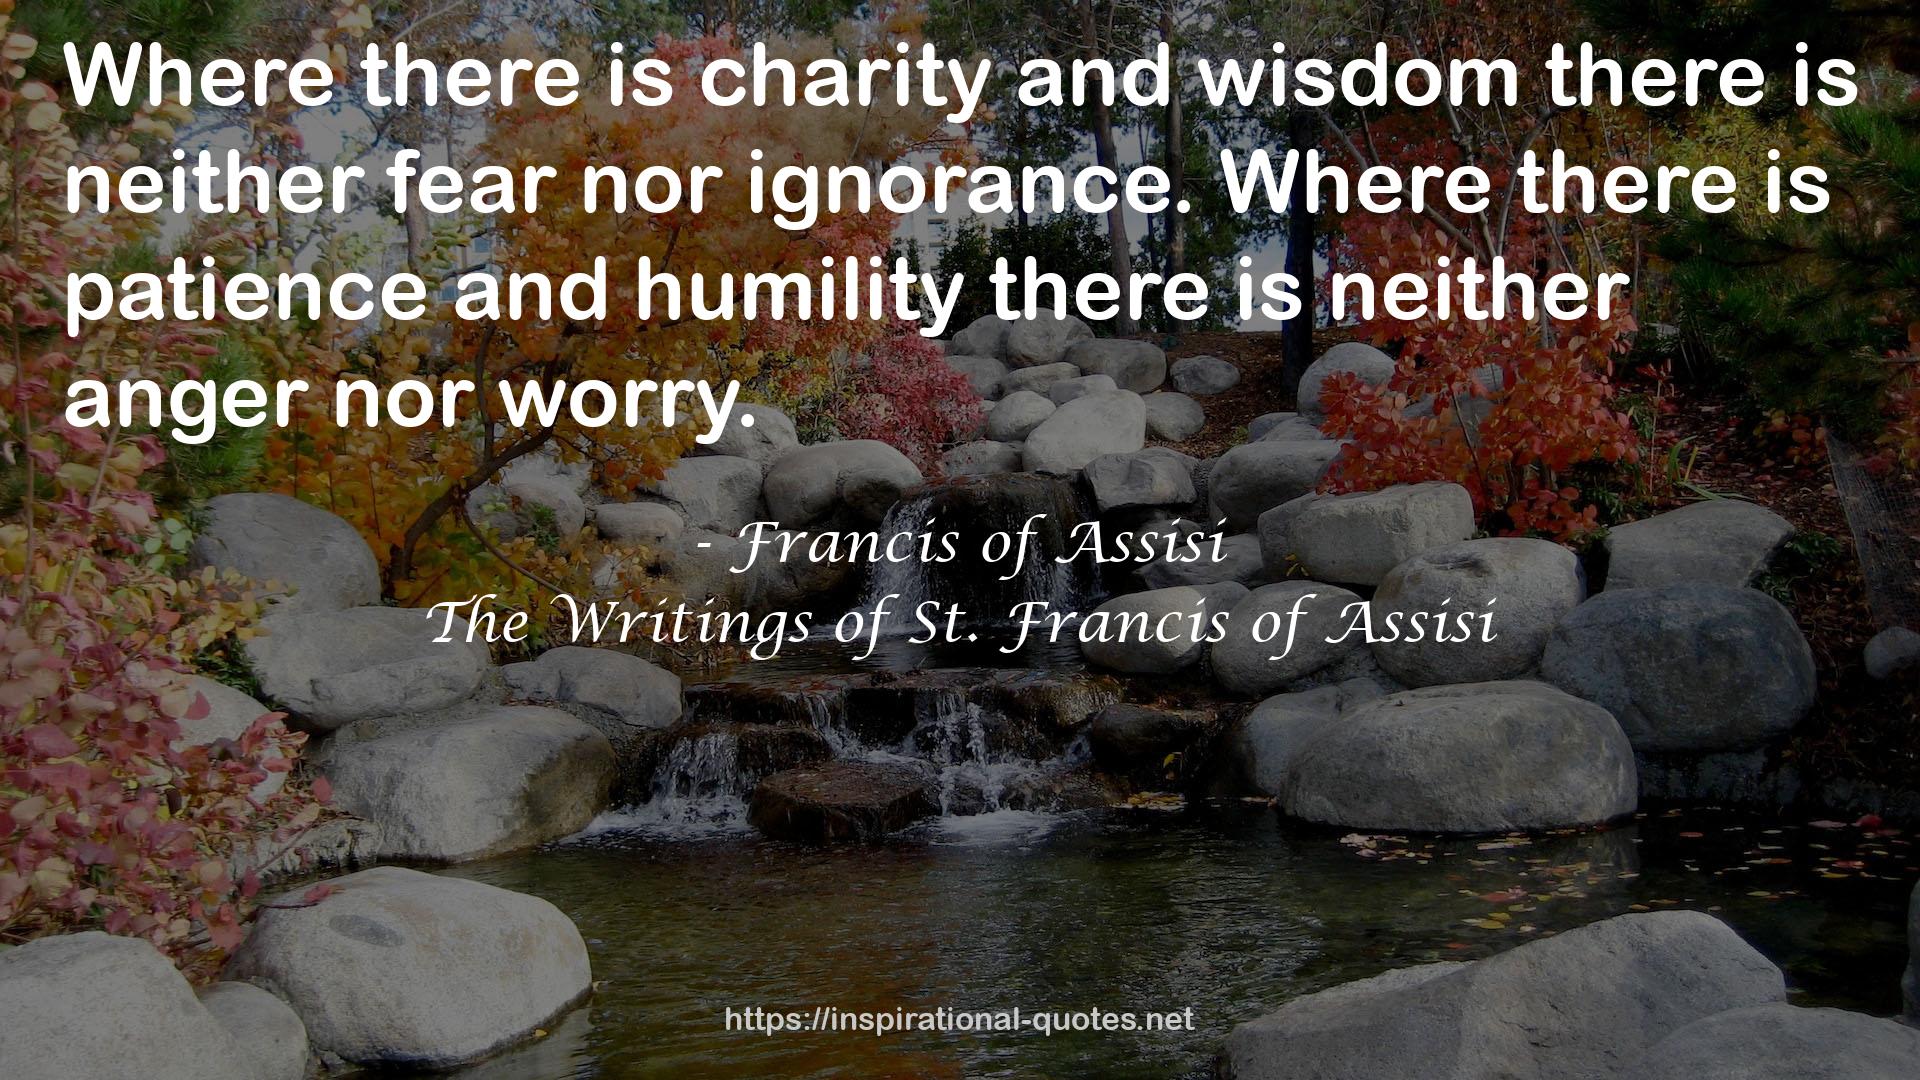 The Writings of St. Francis of Assisi QUOTES